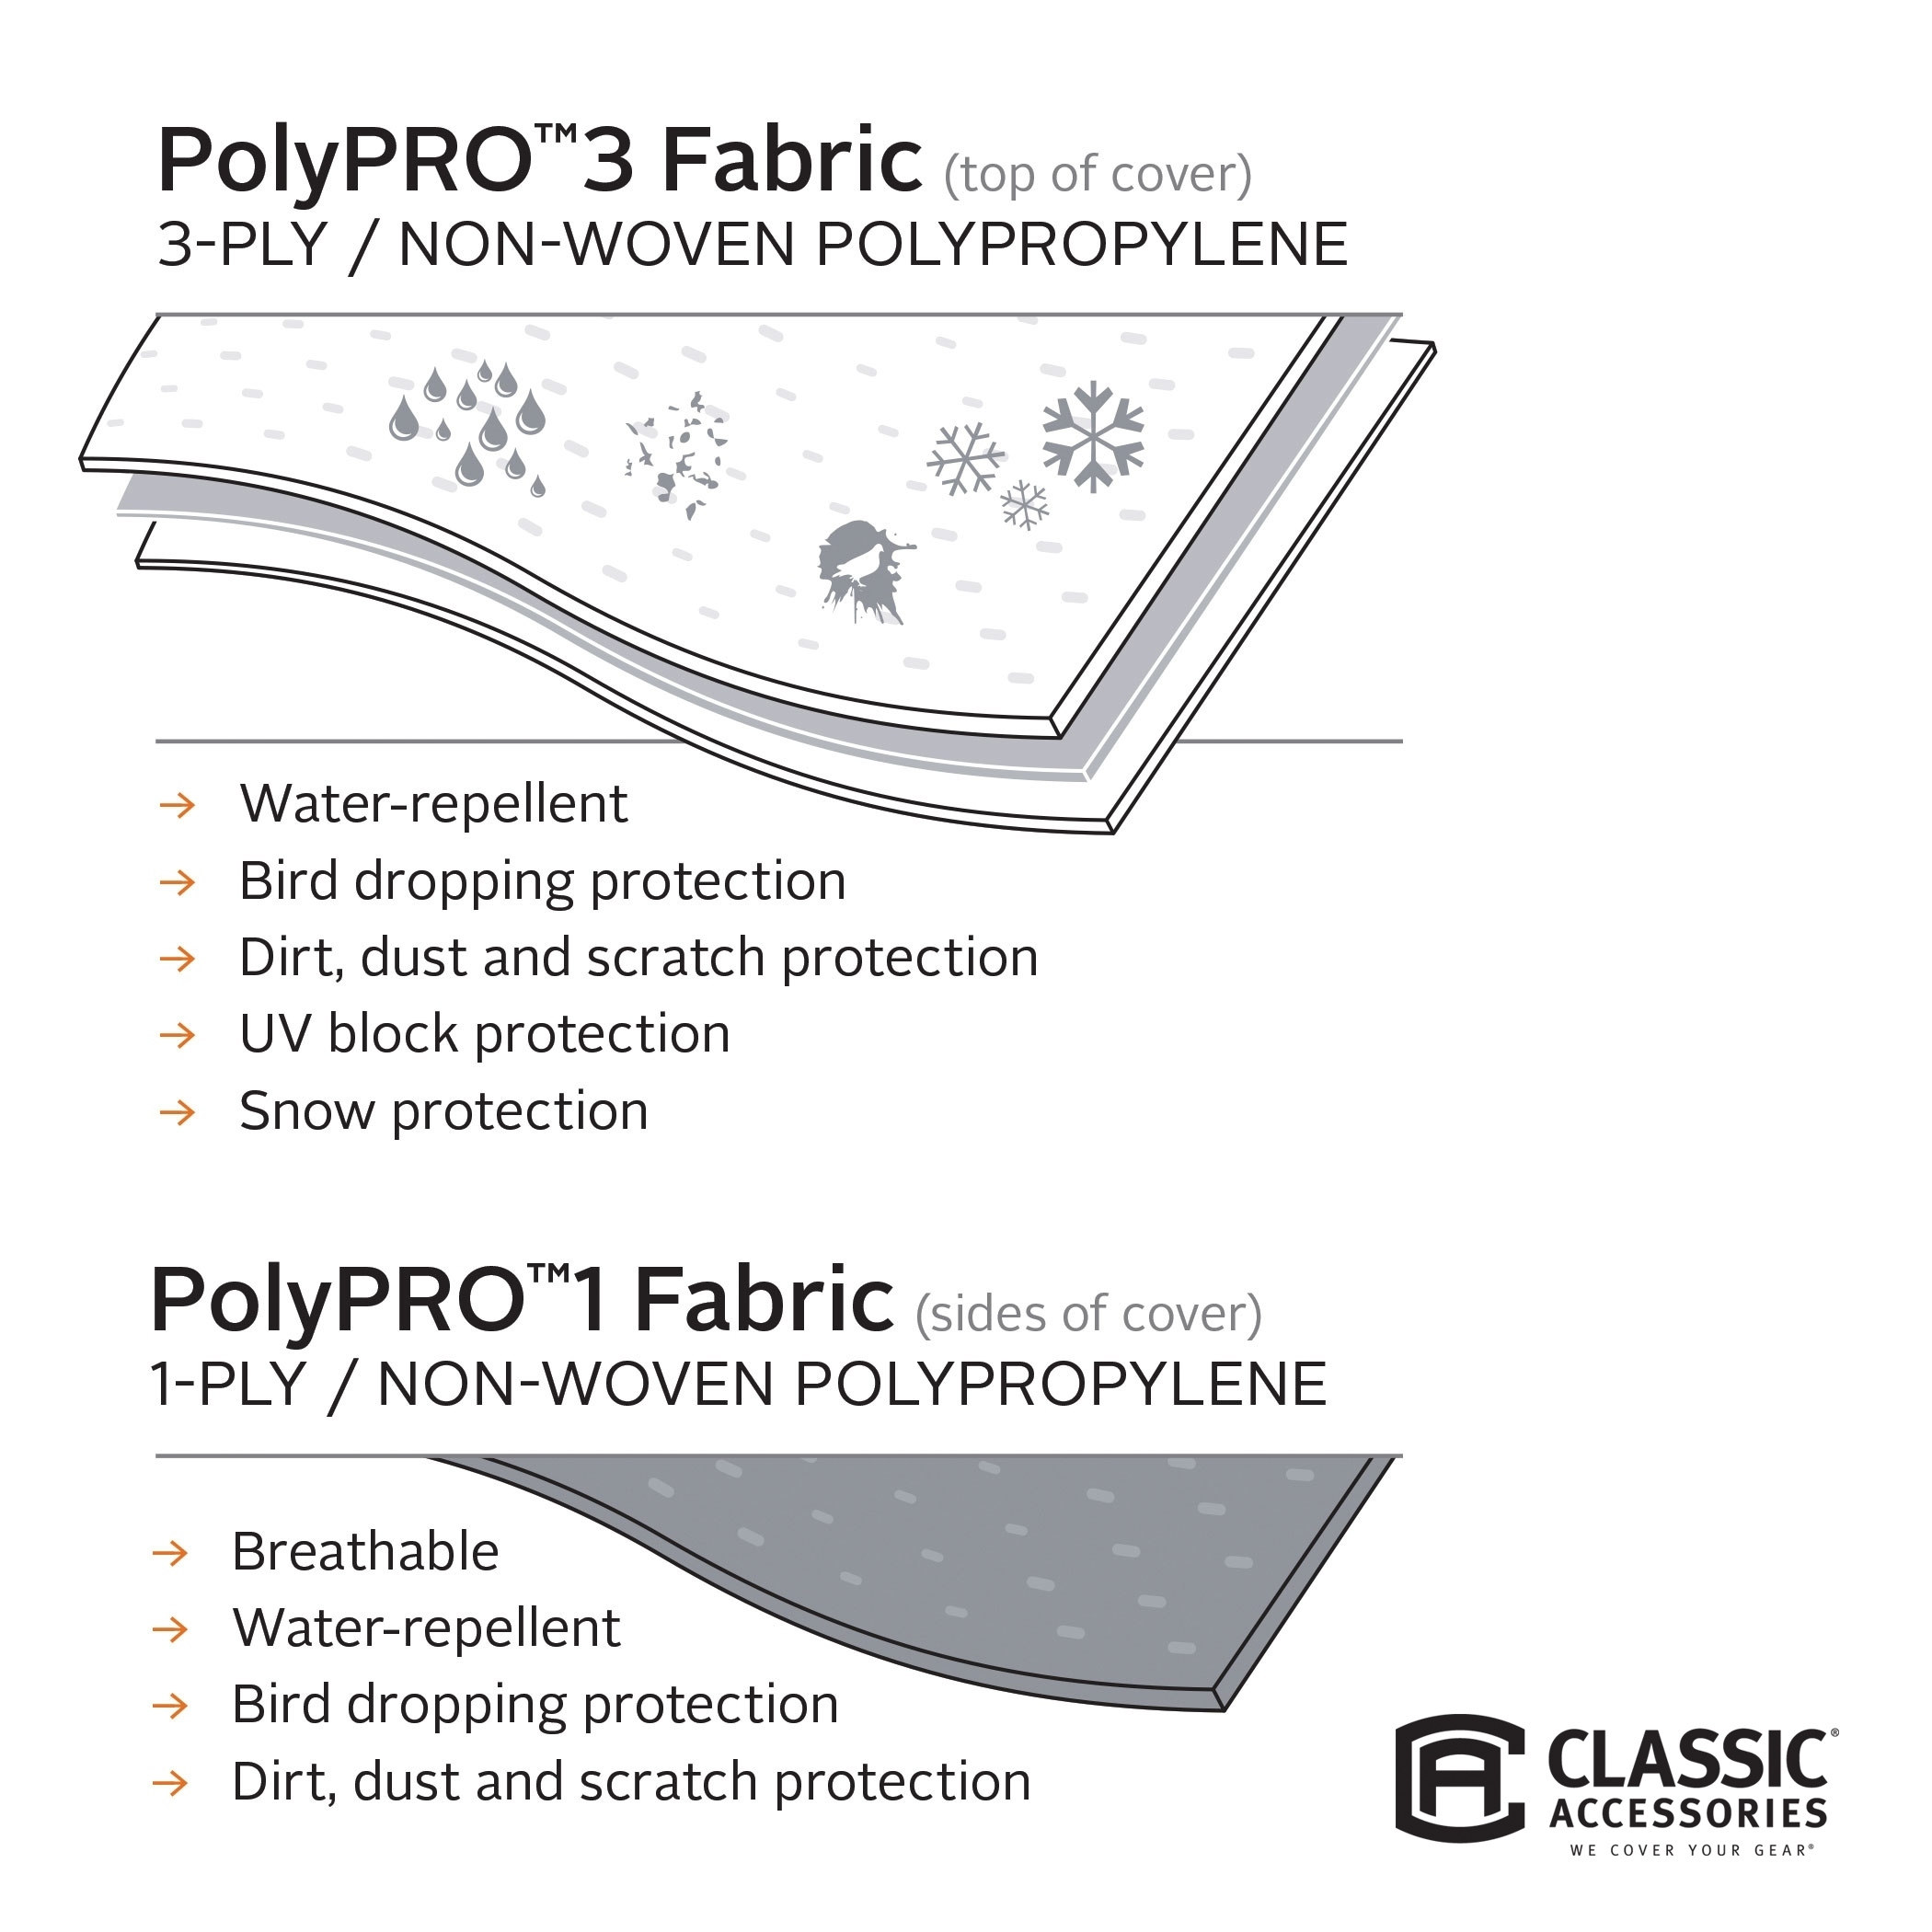 Classic Accessories OverDrive PolyPRO 3 Deluxe Extra Tall Class A RV Cover, Fits 30' - 33' RVs - Max Weather Protection with 3-Ply Poly Fabric Roof RV Cover - image 6 of 6